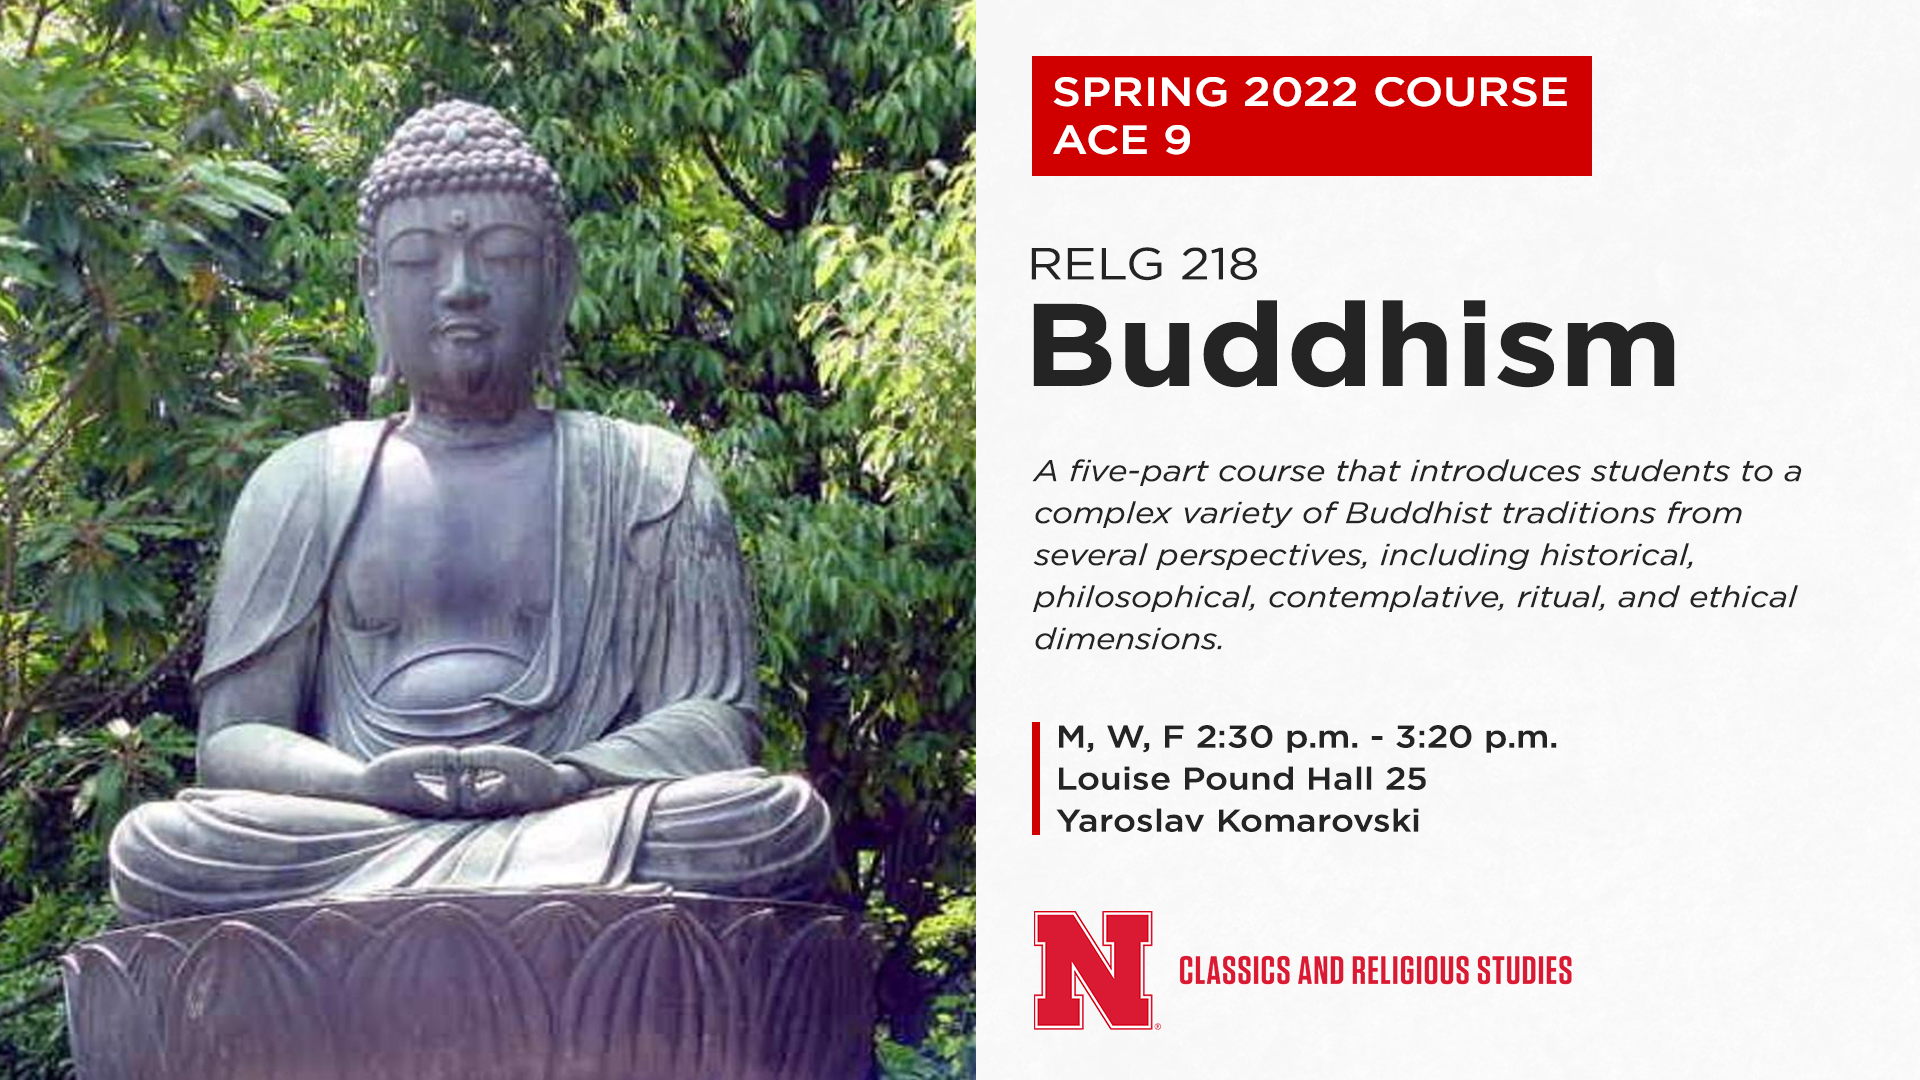 Buddism course offered Spring 2022